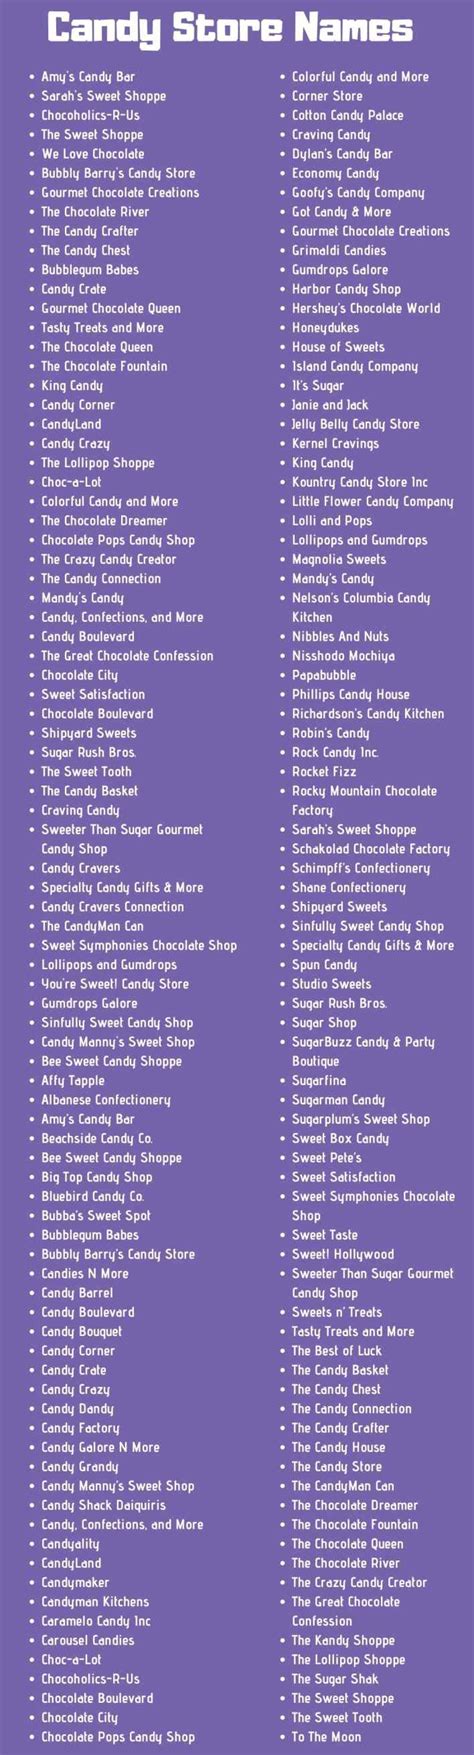 The name of your business will forever play a role in: Candy Store Names: 300+ Sweet Candy Shop Names Ideas